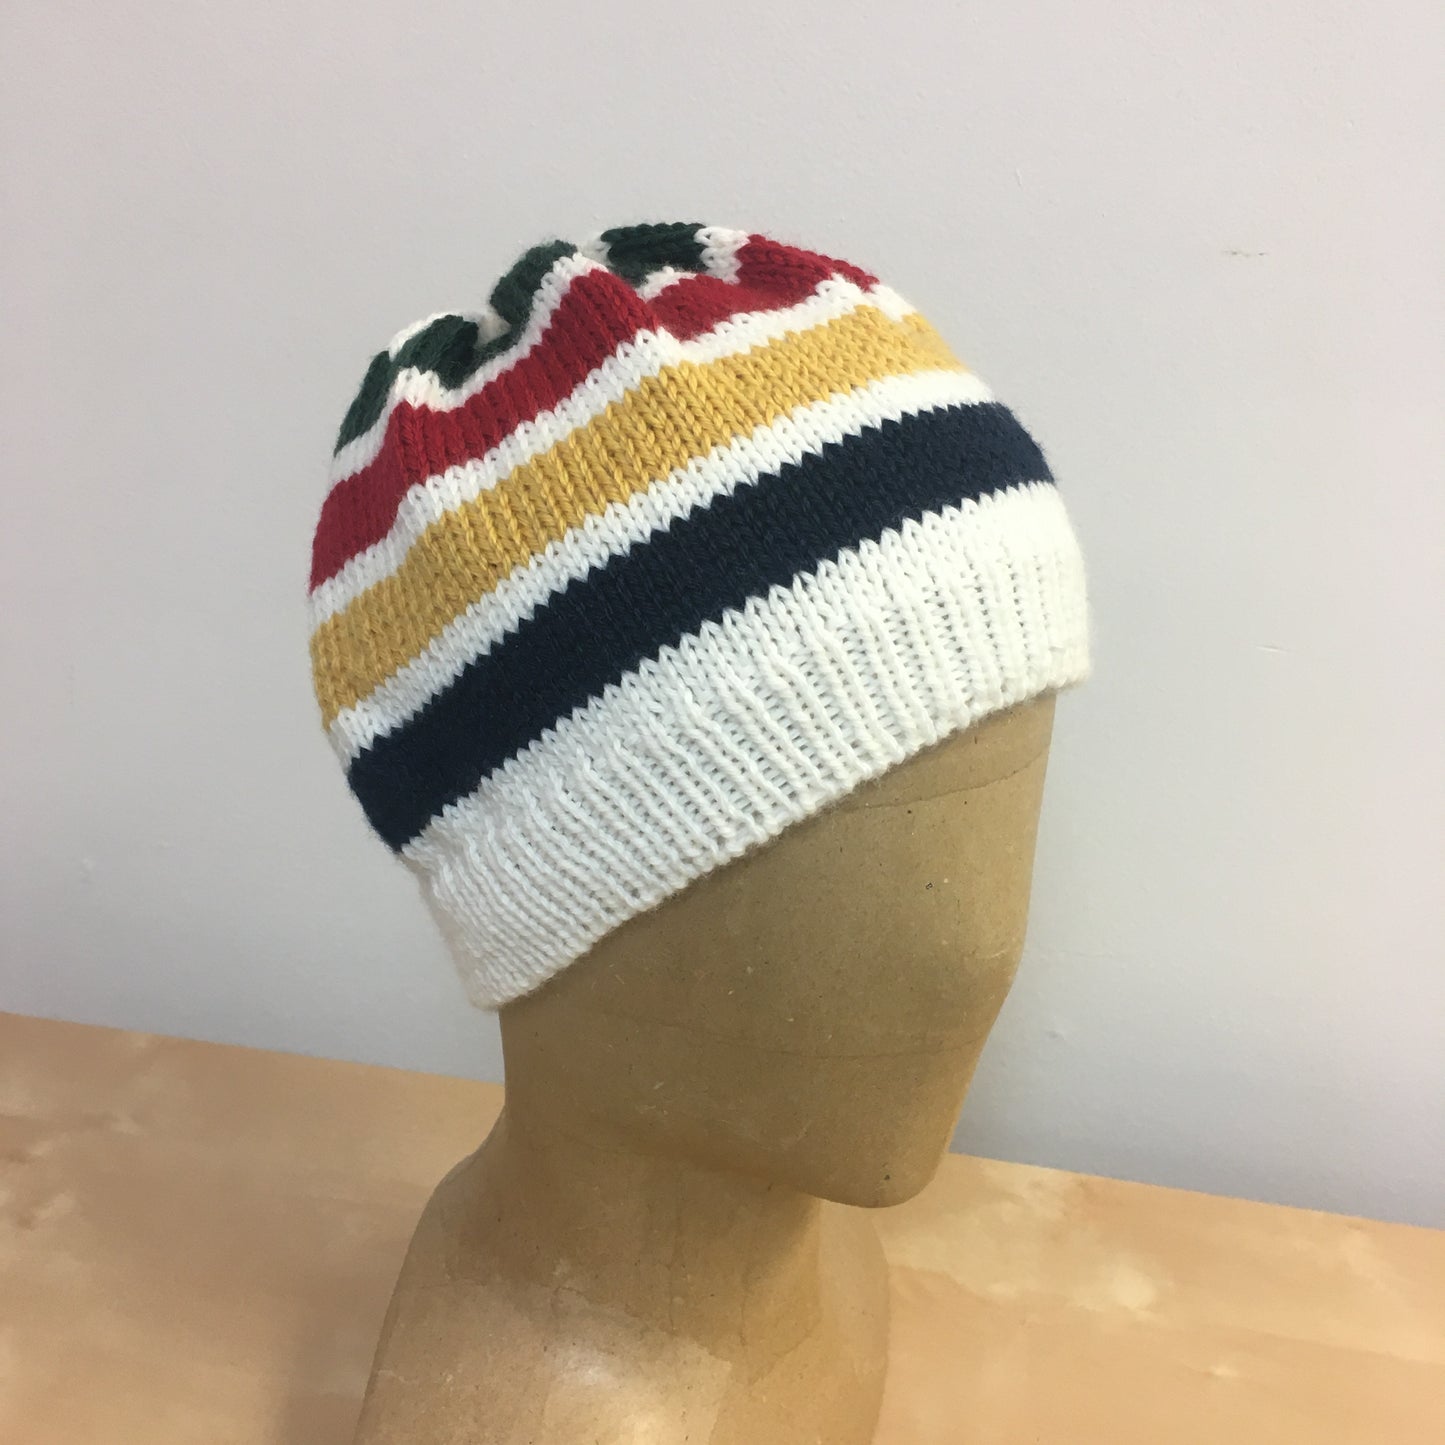 Hudson Bay Toque, Cowl and Mittens Kits